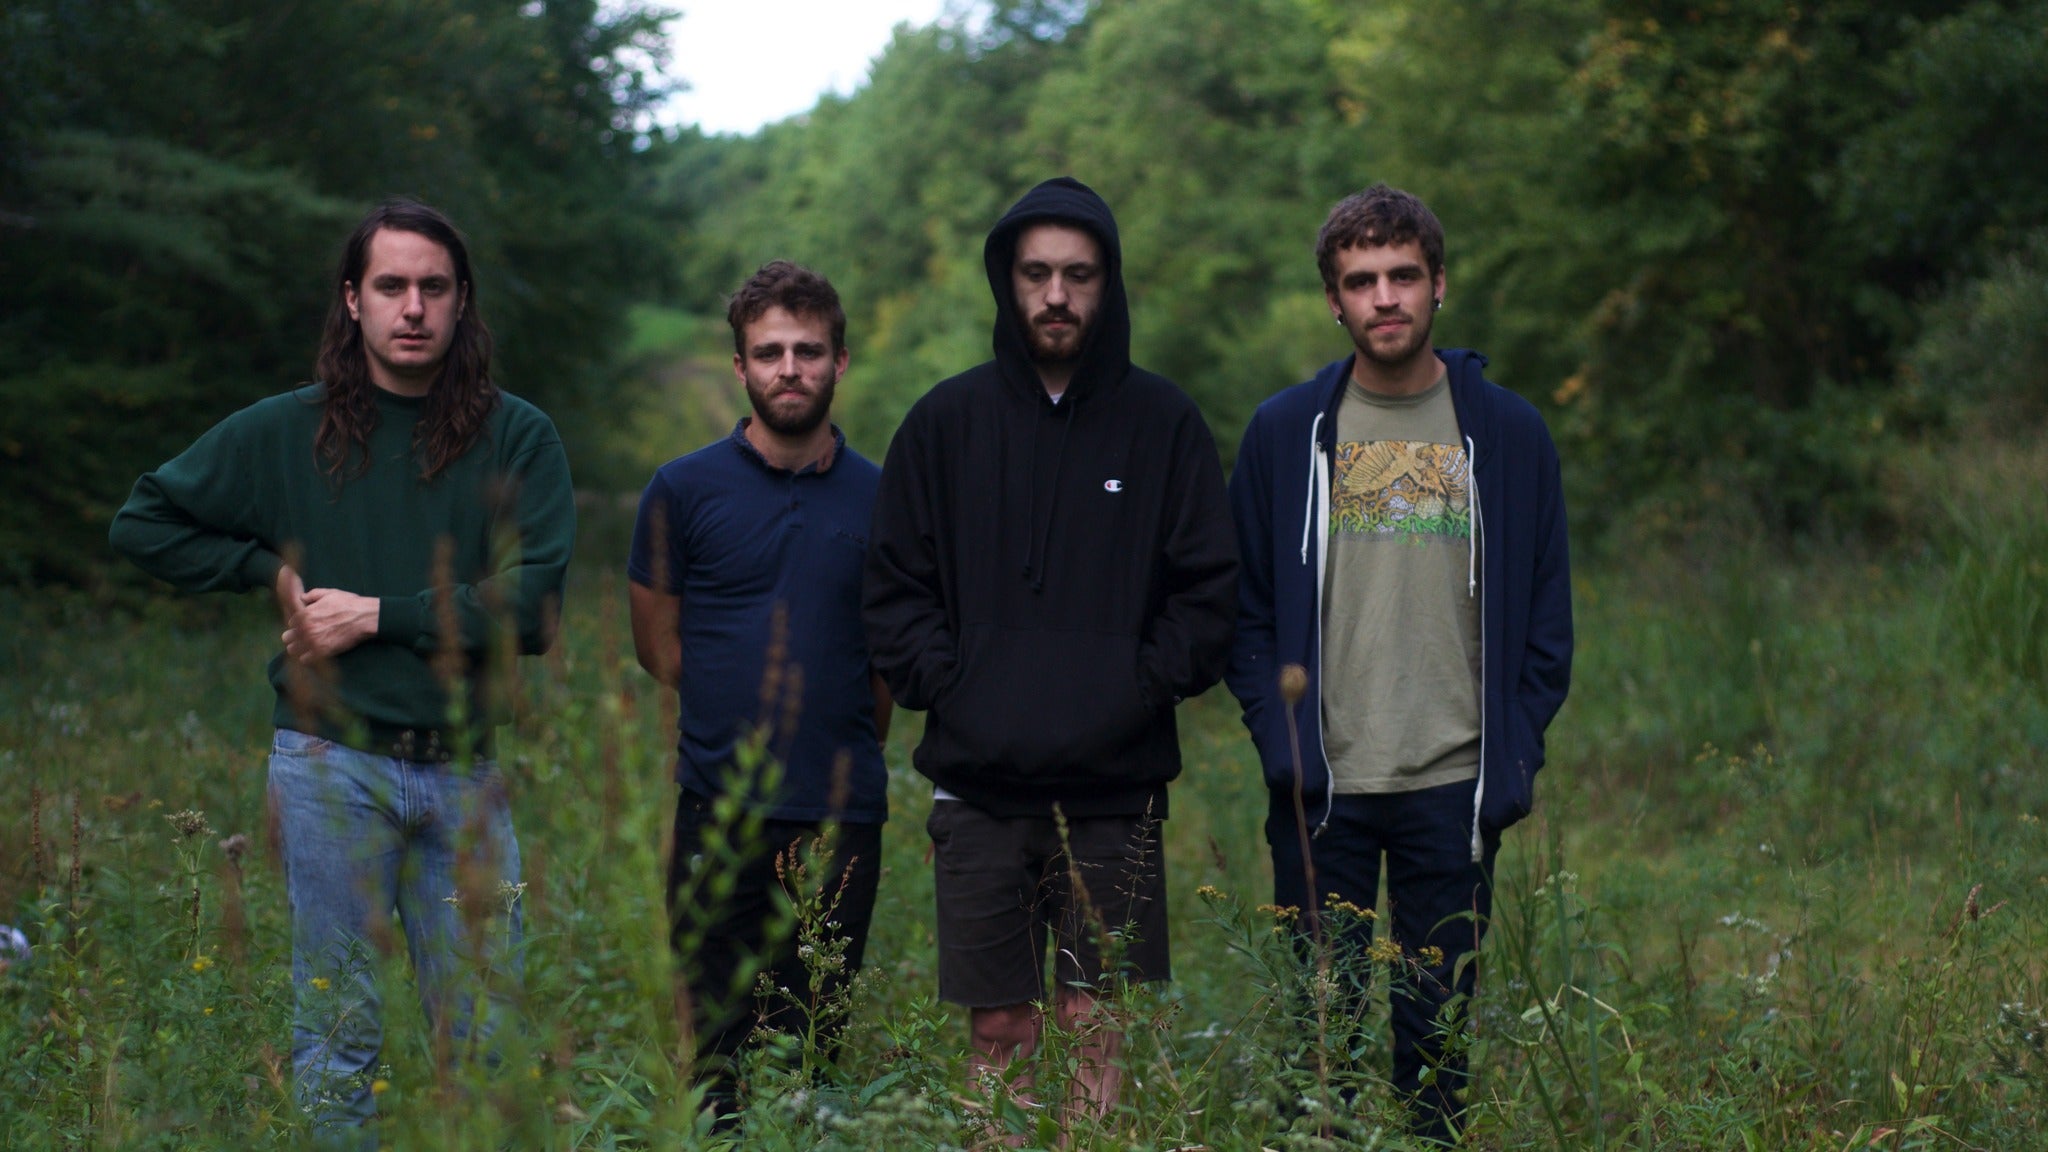 The Hotelier, Foxing presale passcode for event tickets in Philadelphia, PA (Theatre of Living Arts)